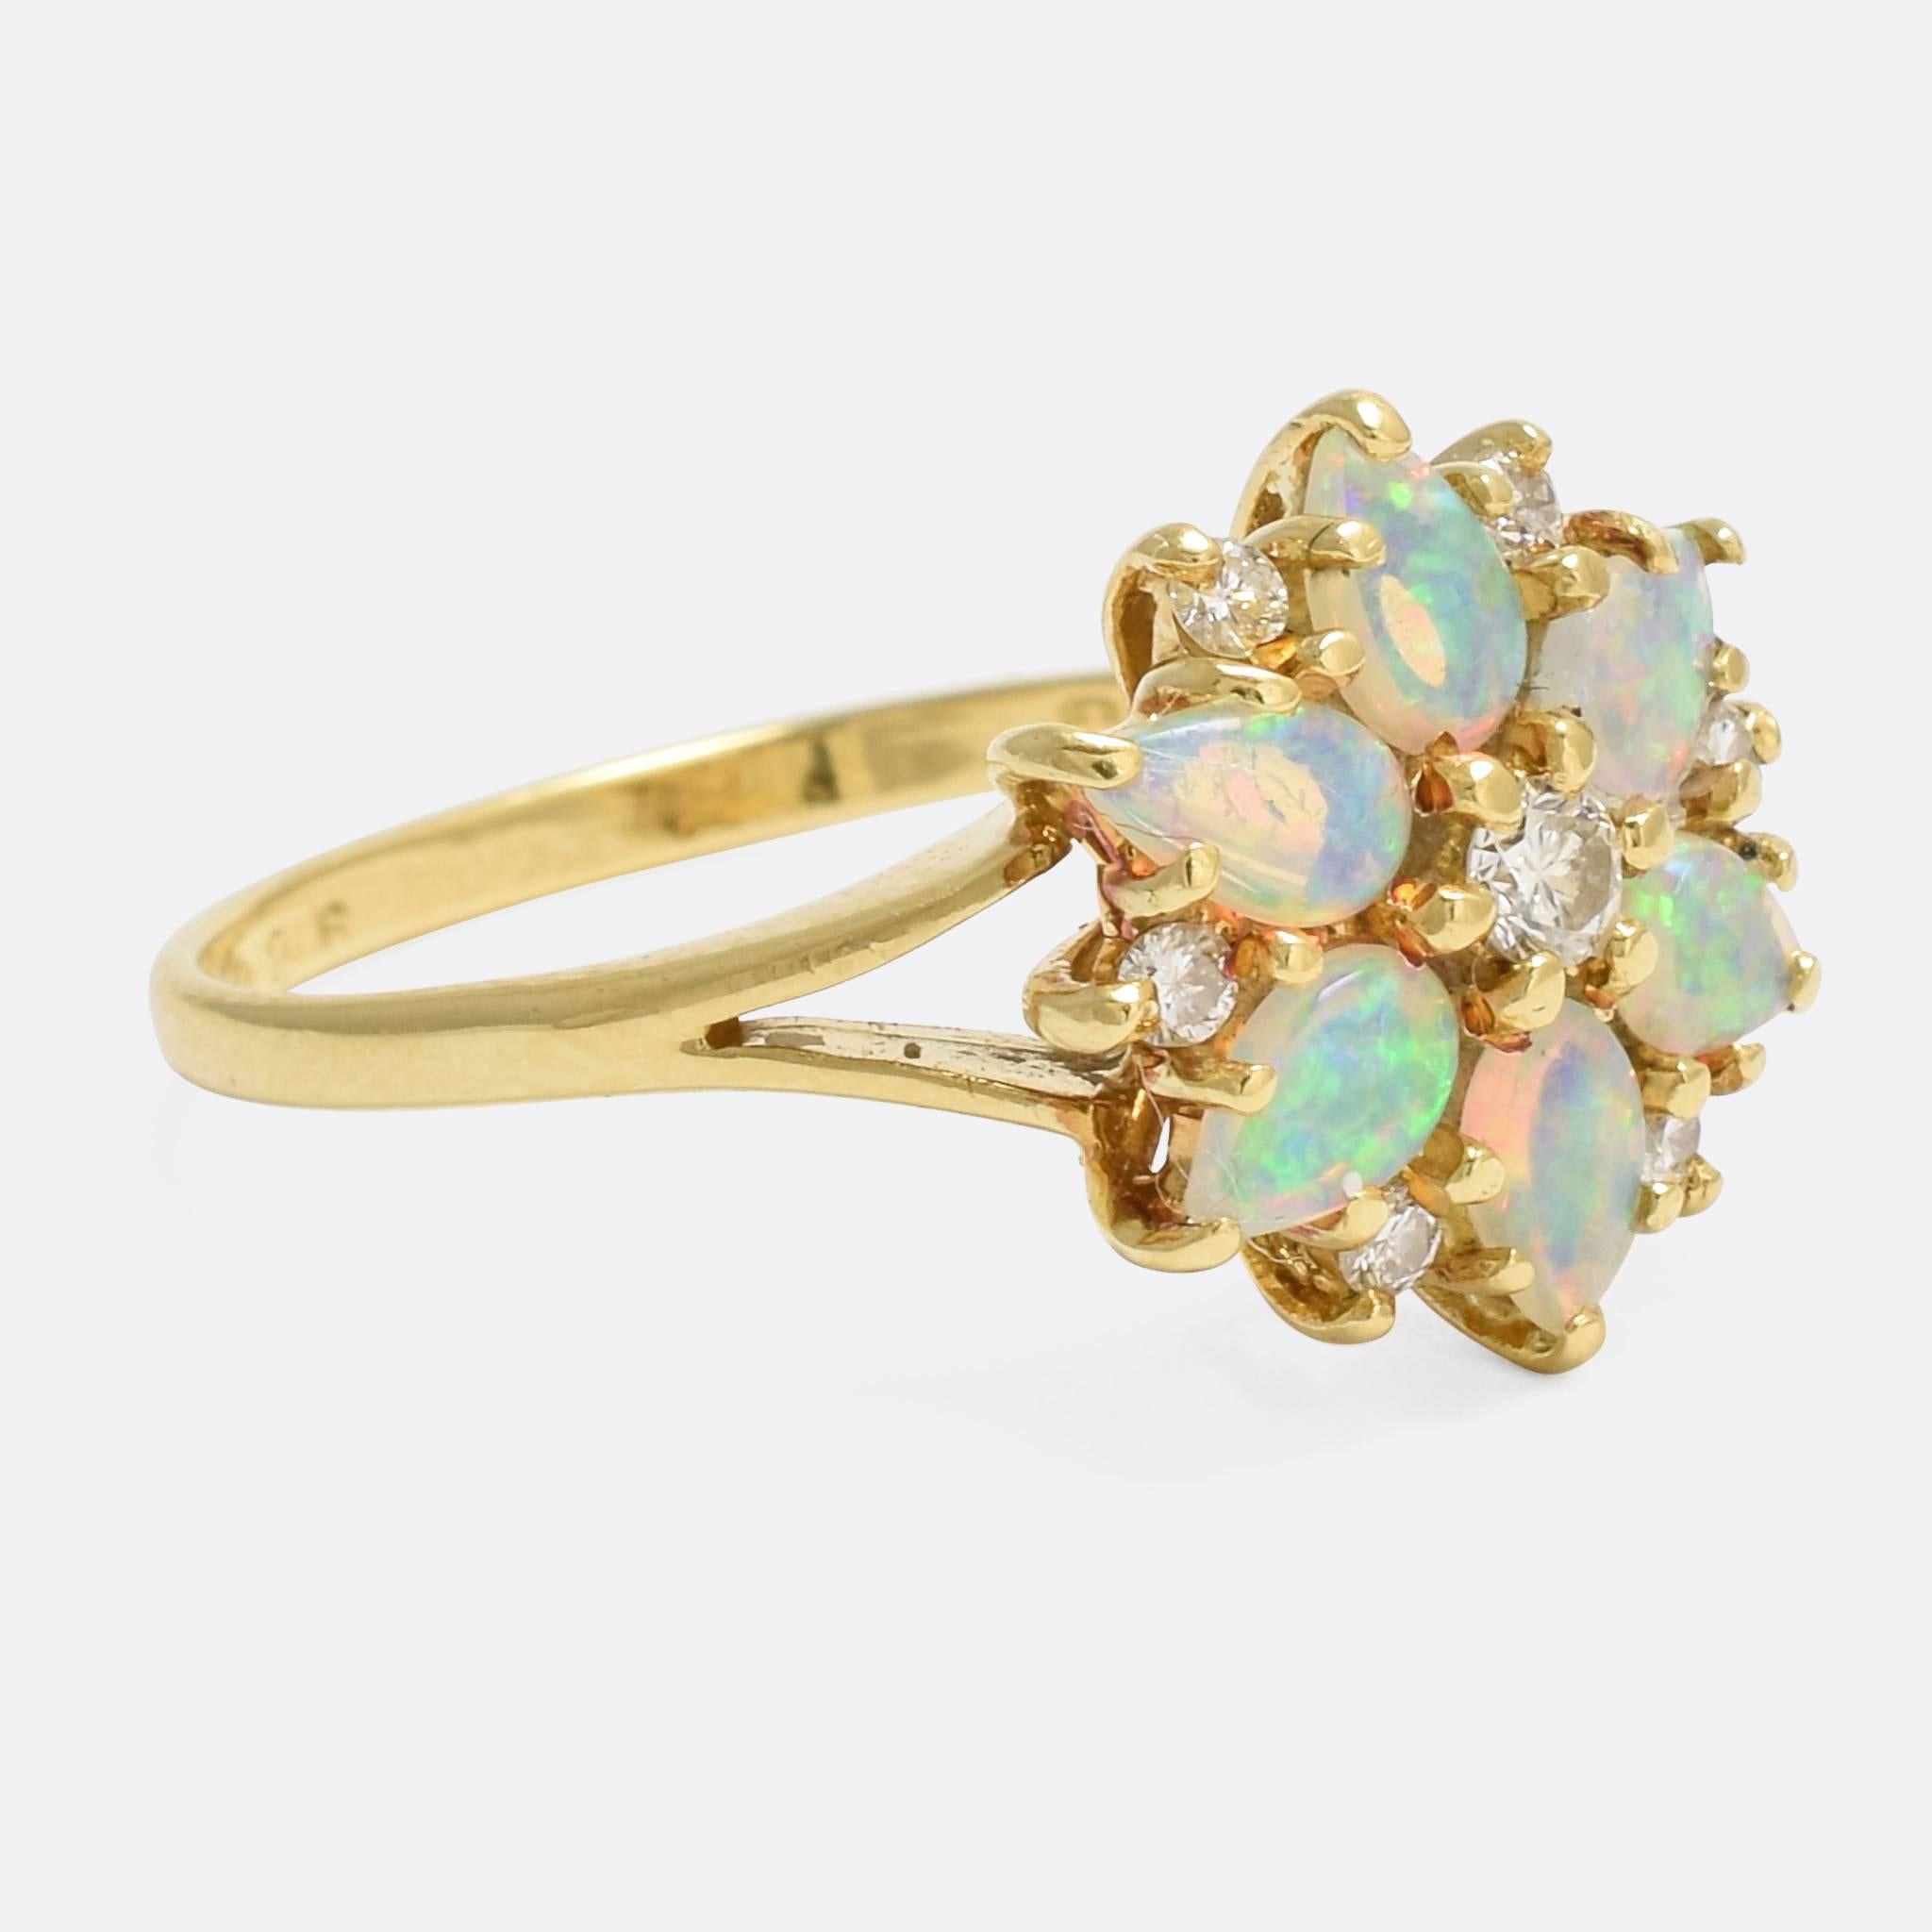 A striking vintage cluster ring set with six pear-shaped opal cabochons and seven brilliant cut diamonds. The opals are particularly bright, seemingly bursting with colour, and the diamonds are sparkly and white. The stones rest in a basket gallery